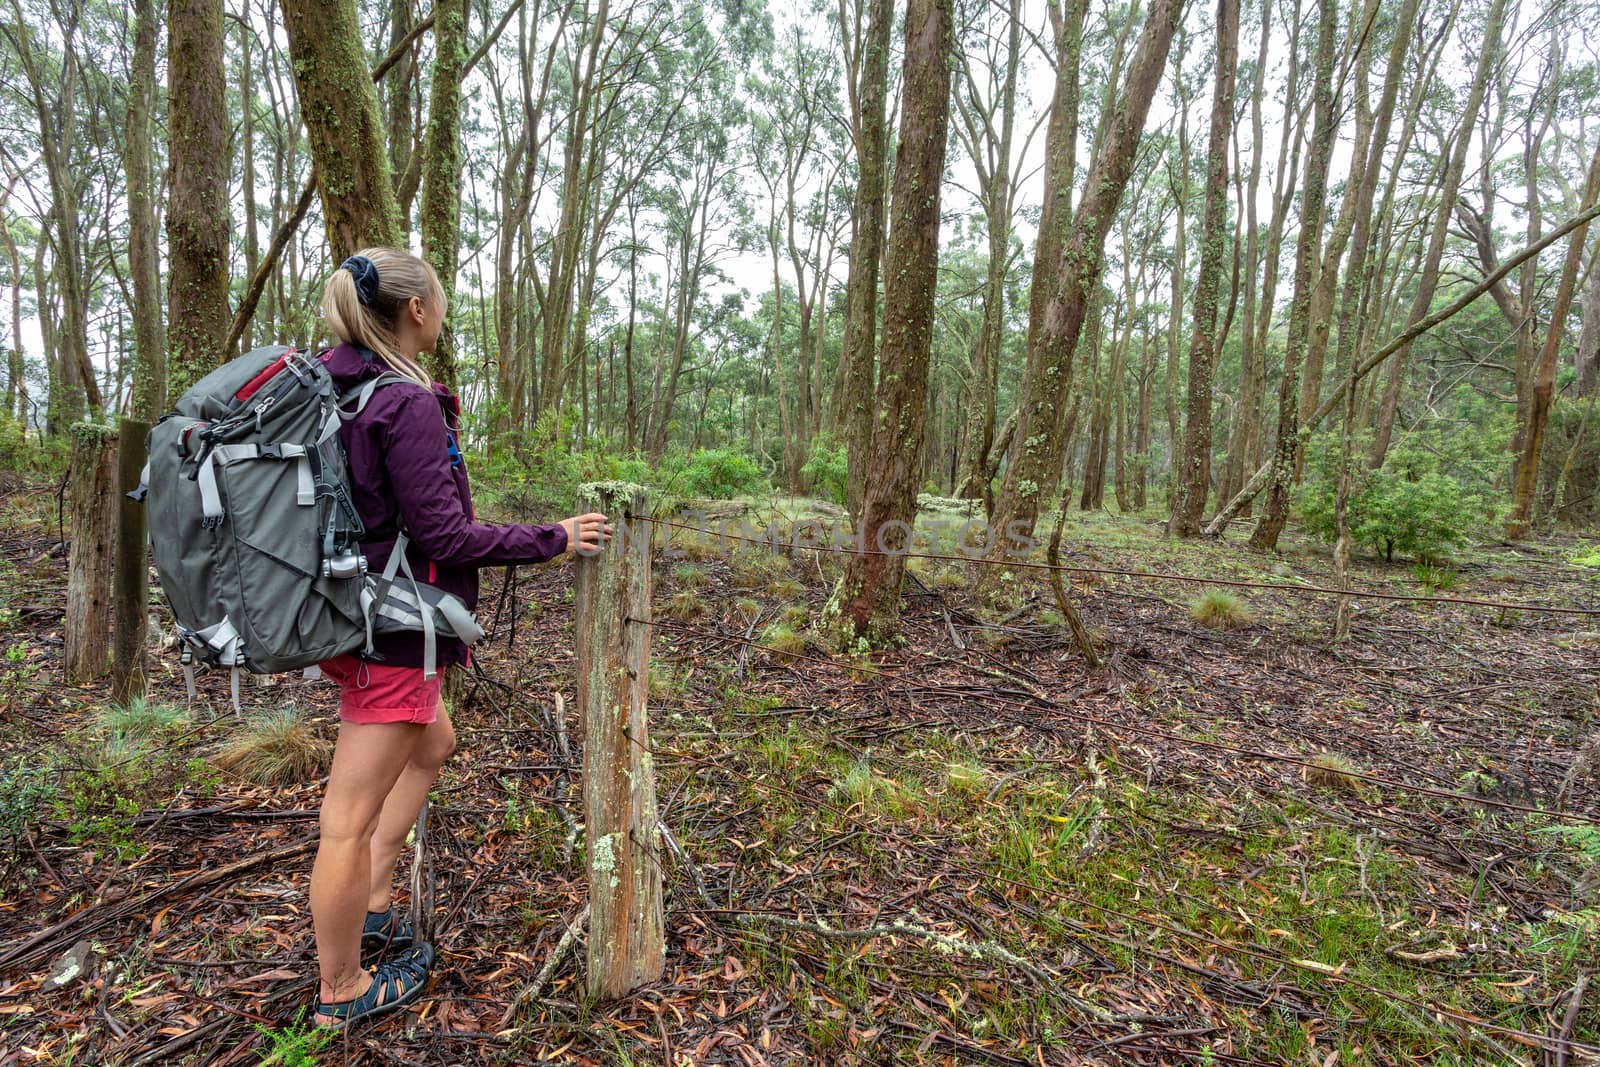 Woman stopped to view the lichens and mosses covering all the trees and fallen branches during  a bushwalk on a hiking trail through cool temperate forest of gums and eucalypts in Australia